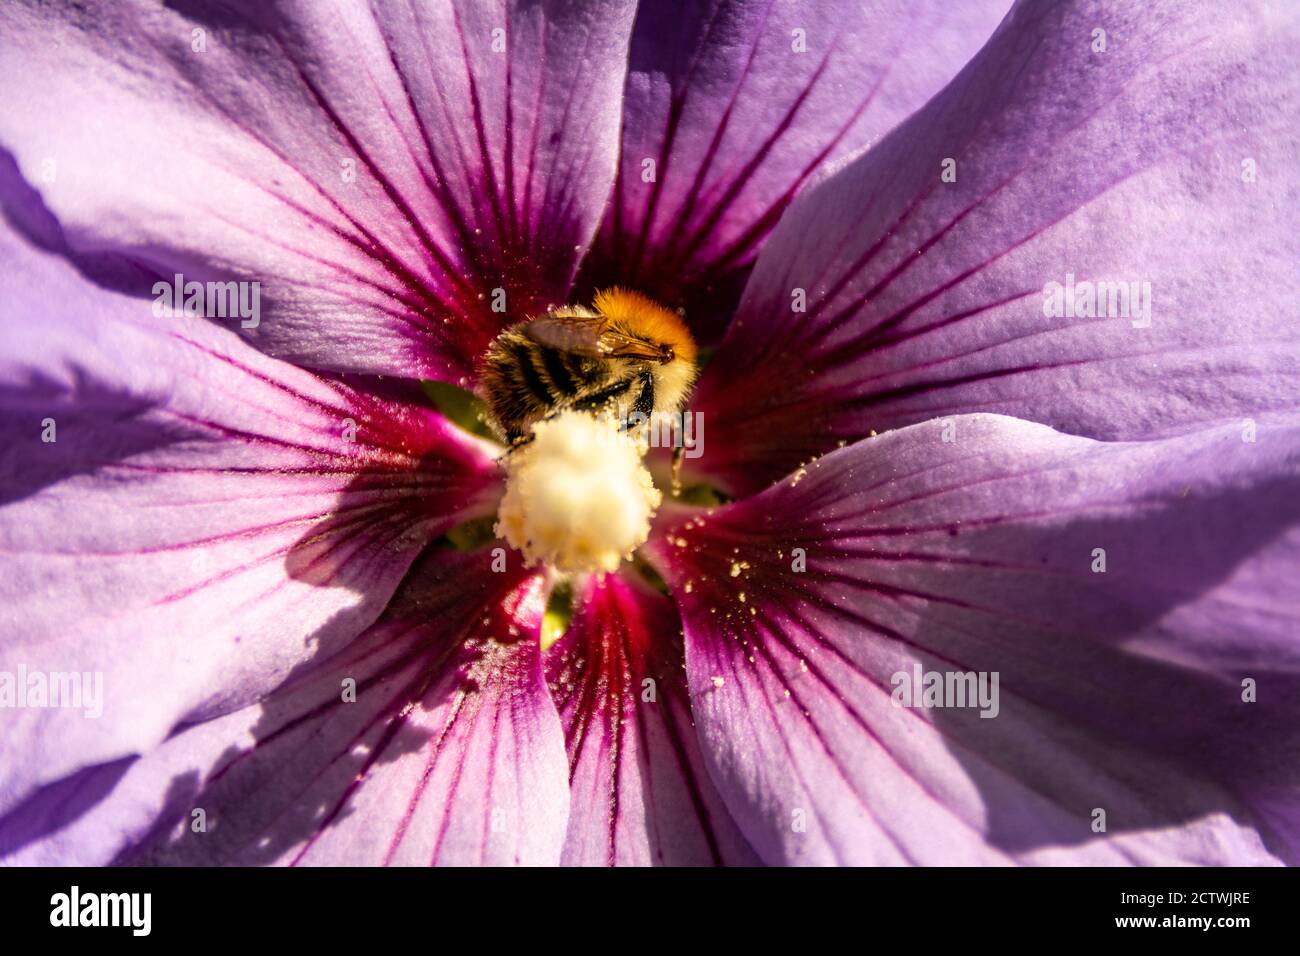 Titel A bee collects nectar from a purple flower. Macro photo. Summer love insects feed on nectar. pictures all the fine details of the insect. flyin Stock Photo